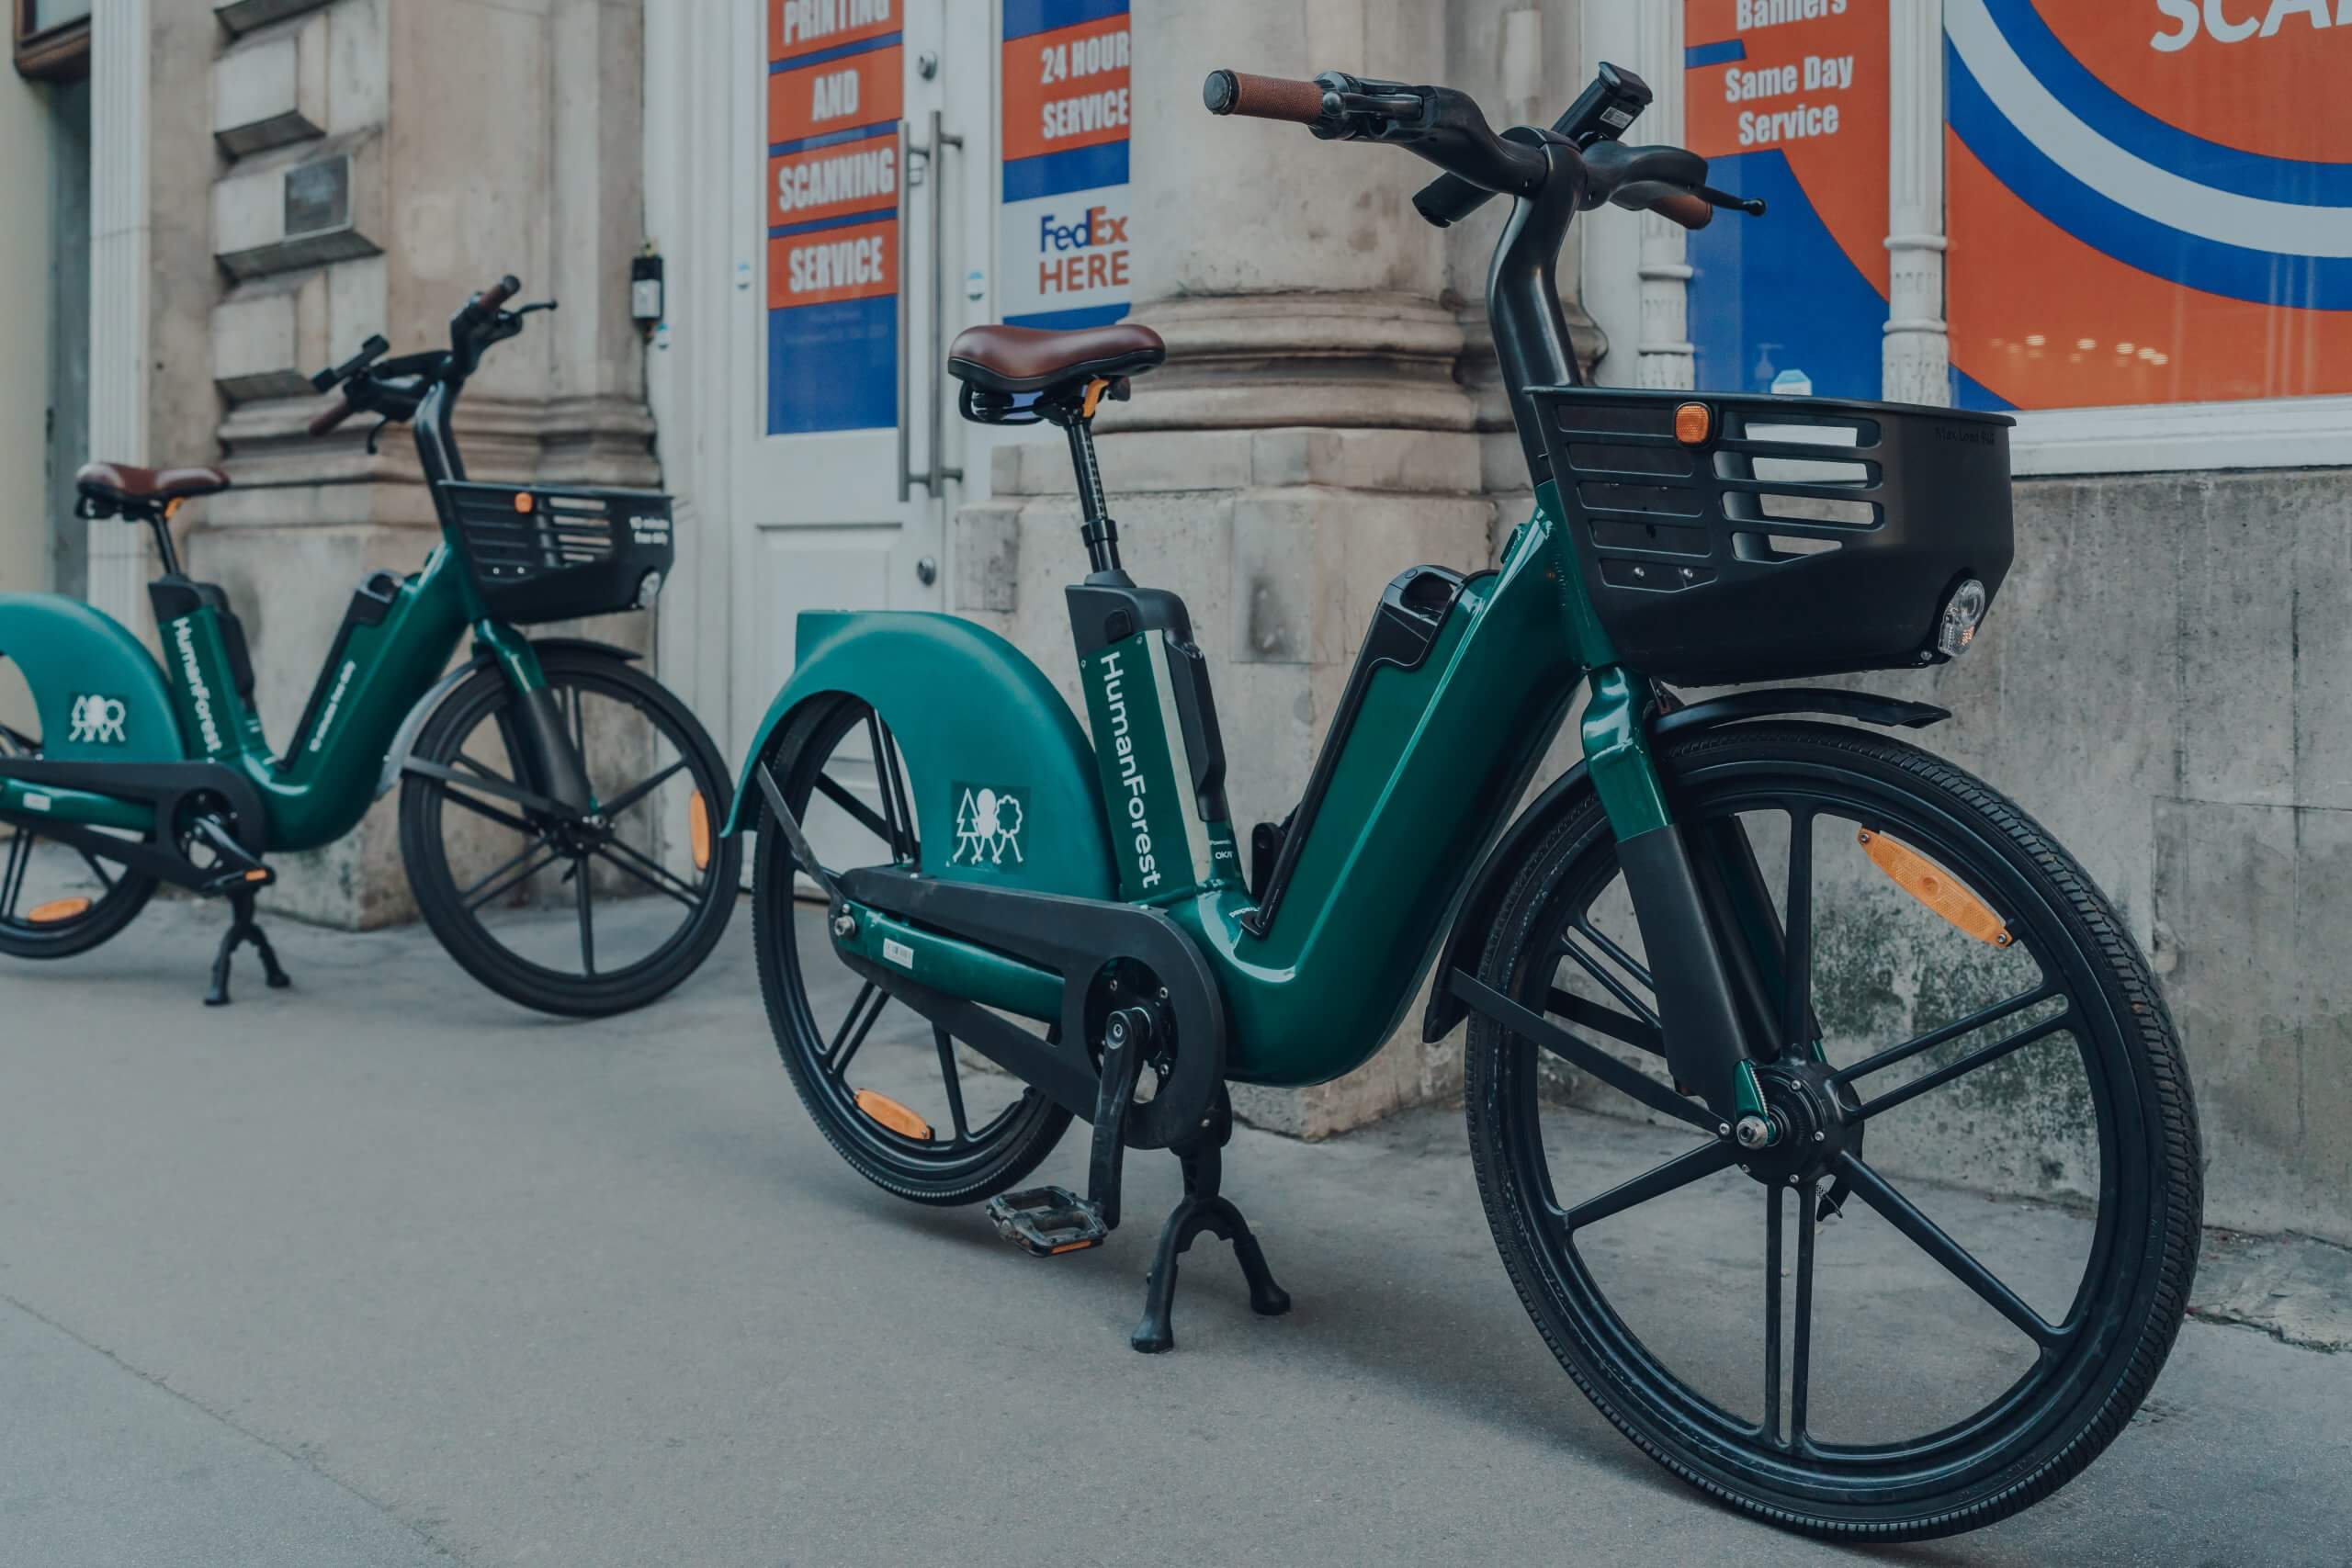 HumanForest and Deliveroo have joined forces to boost sustainable delivery across London. (Photo: Alena Veasey/Shutterstock)